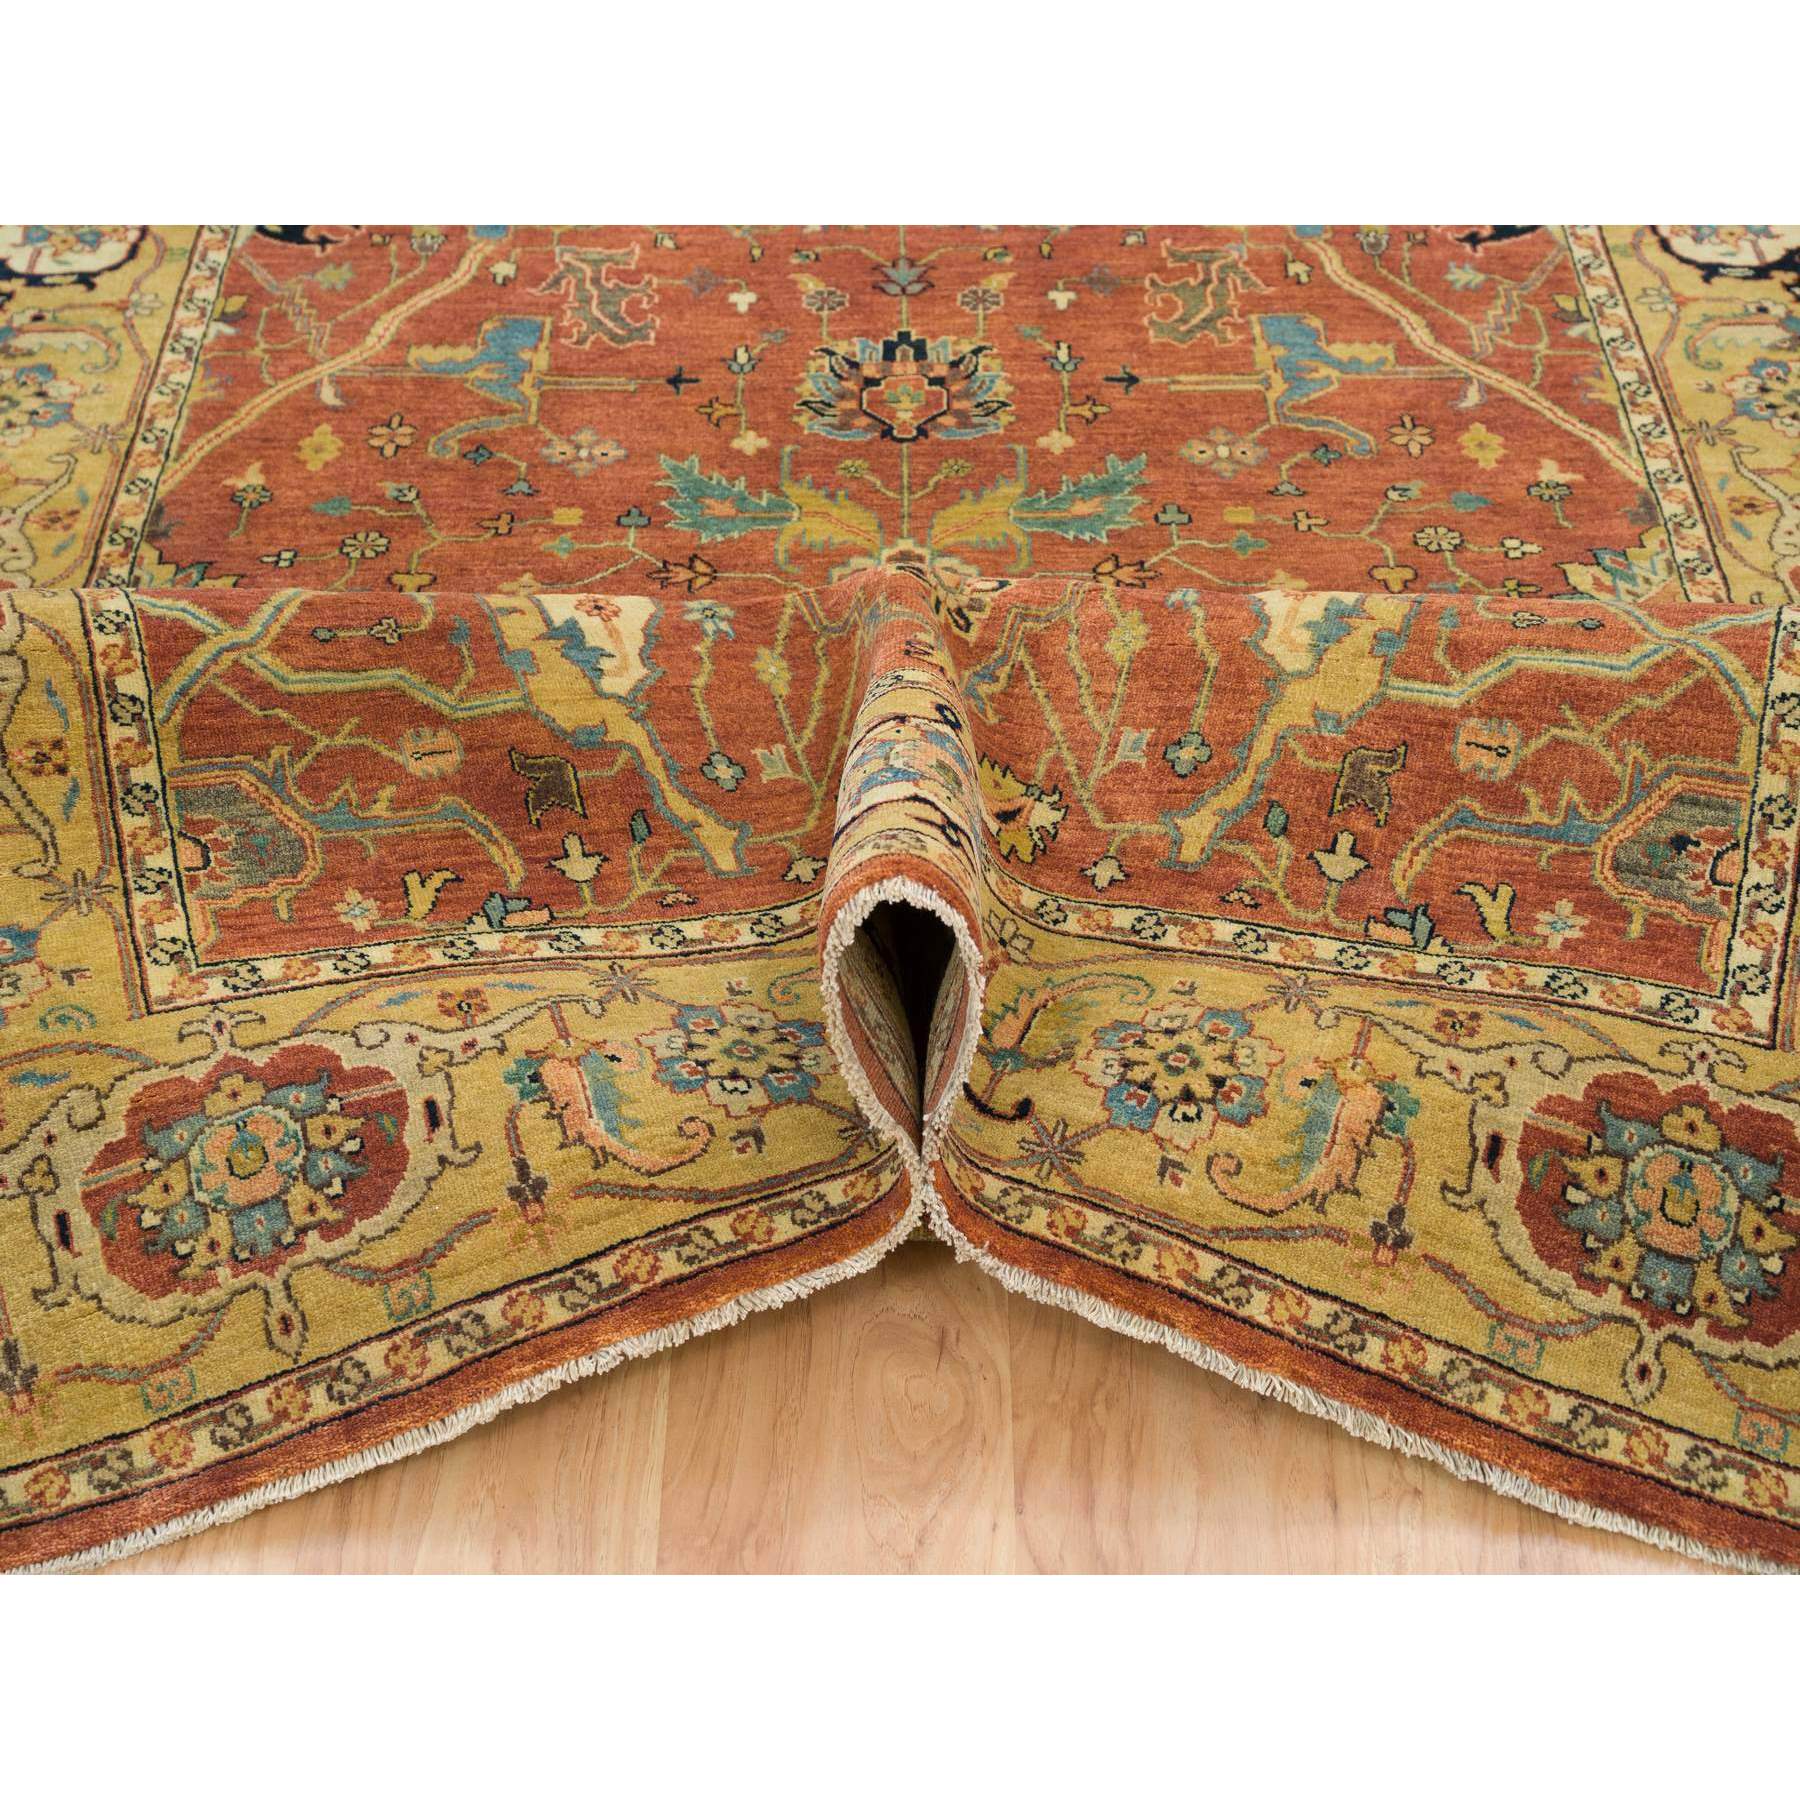 6'x12' Terracotta Red, Antiqued Fine Heriz Re-Creation, Hand Woven, Organic Wool, Natural Dyes, Wide Gallery Runner Oriental Rug 